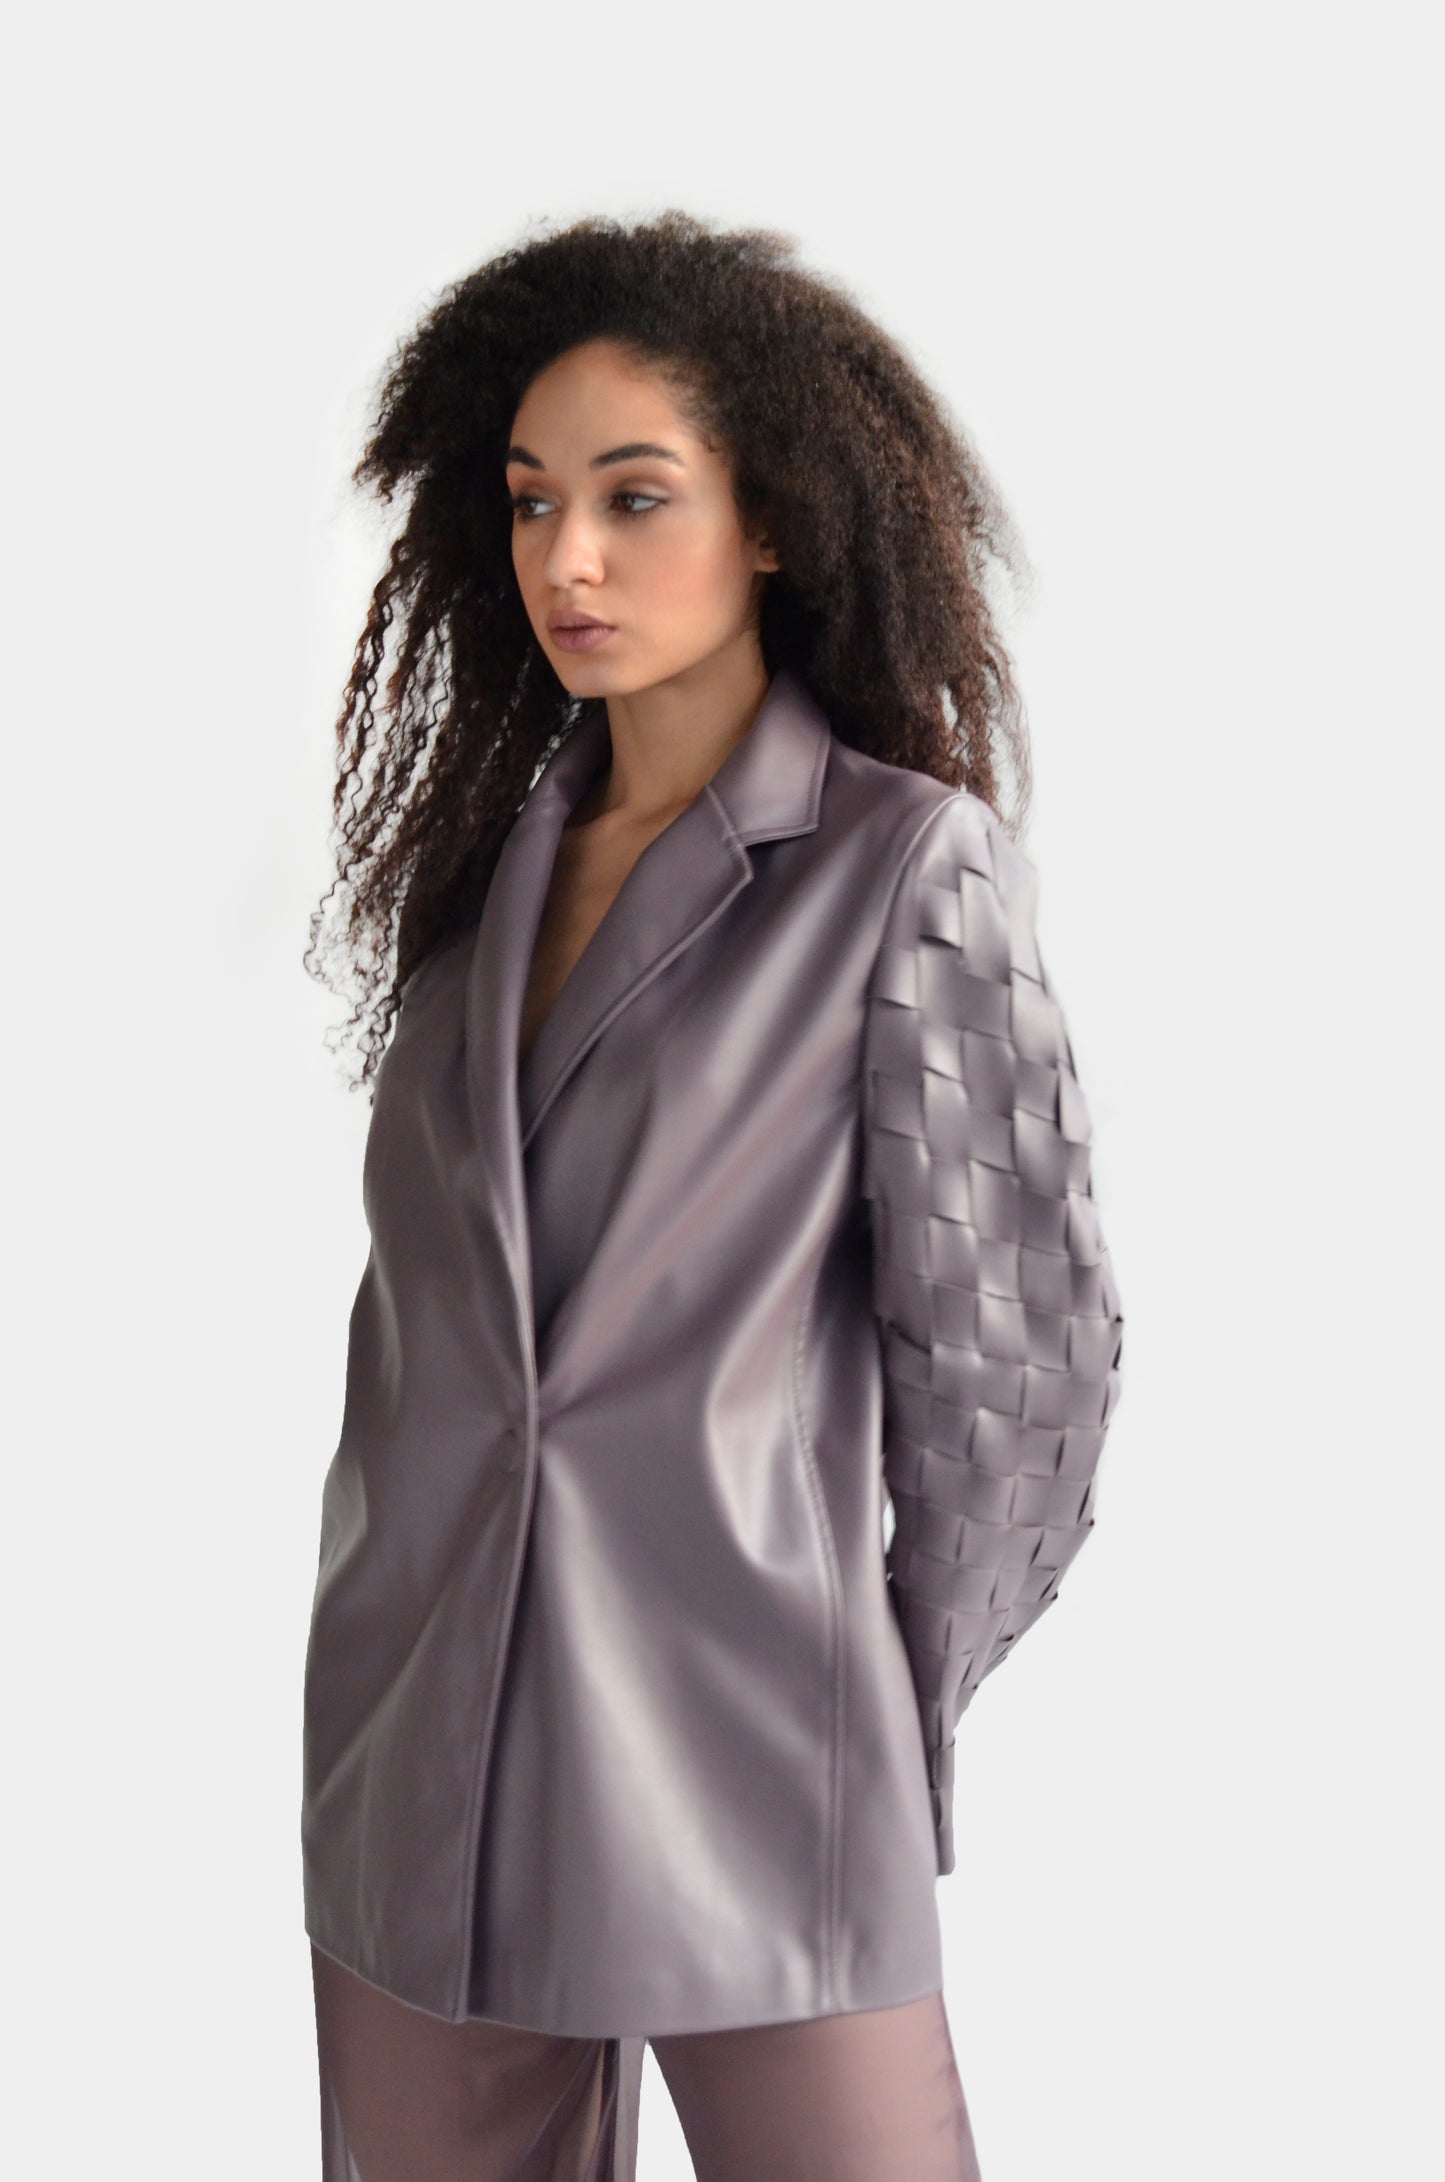 Gray eco leather jacket blazer with weaving detail for women by Holocene